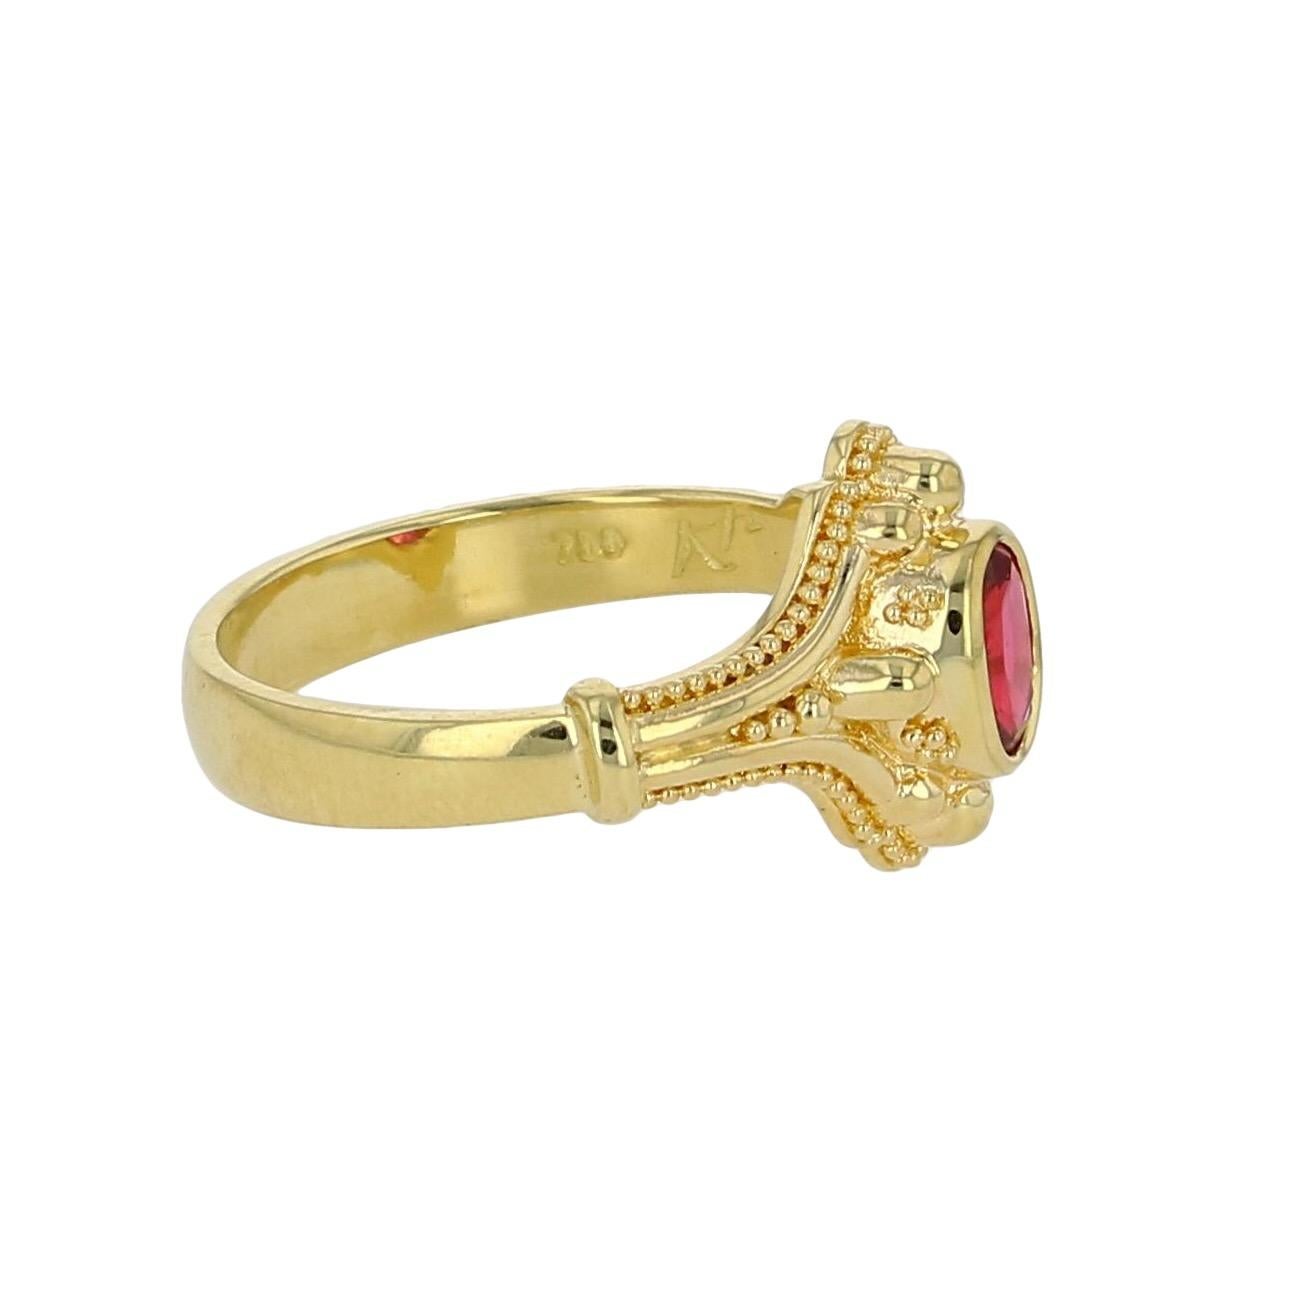 Women's or Men's Kent Raible 18 Karat Gold Red Spinel Solitaire Ring with Fine Granulation For Sale